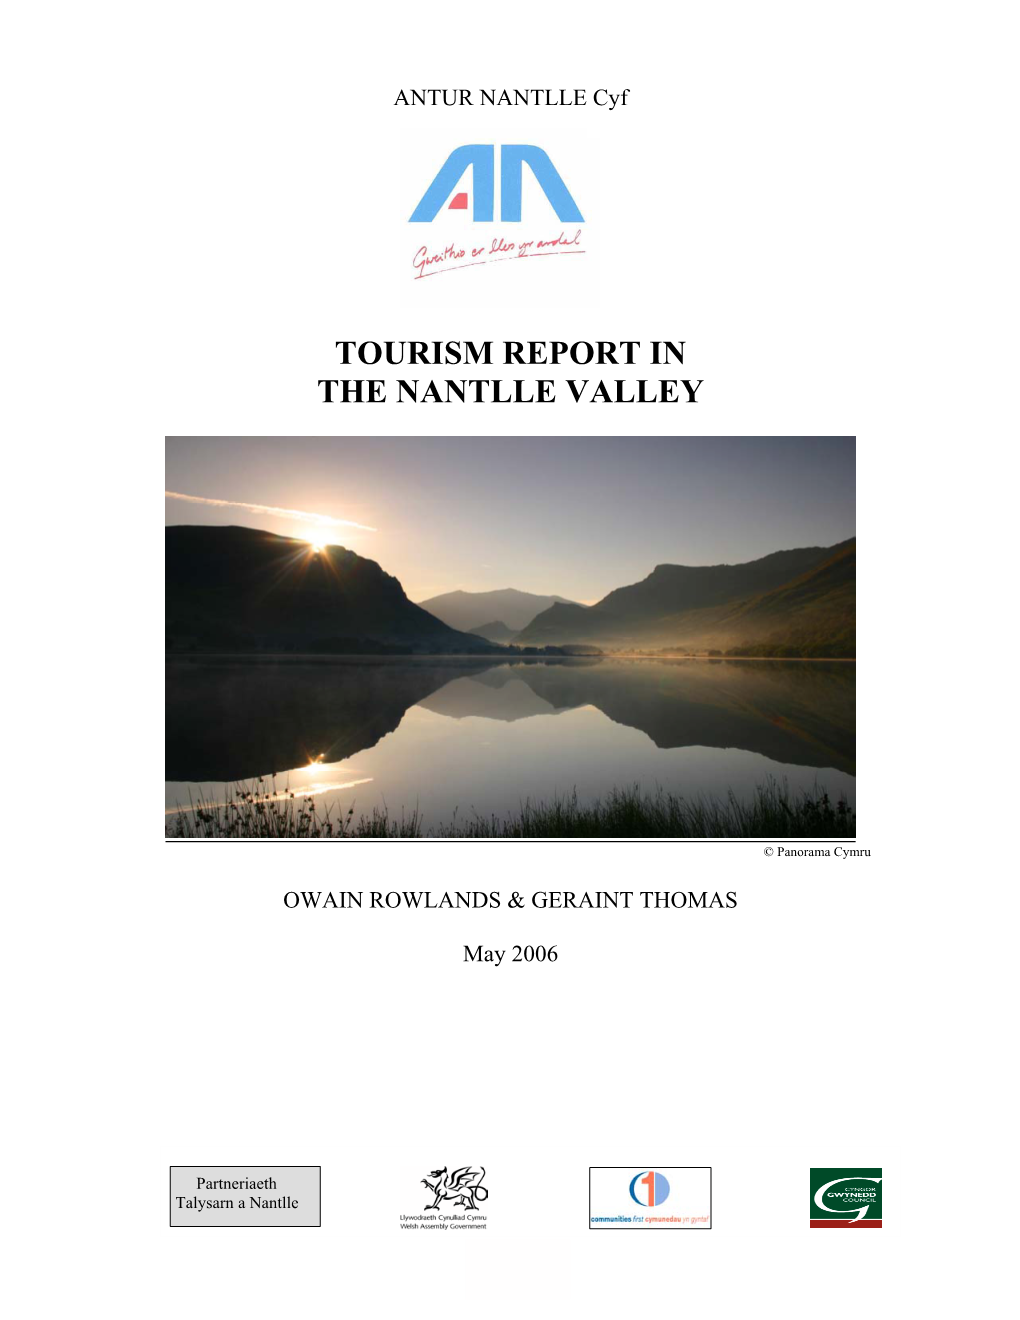 Tourism Report in the Nantlle Valley